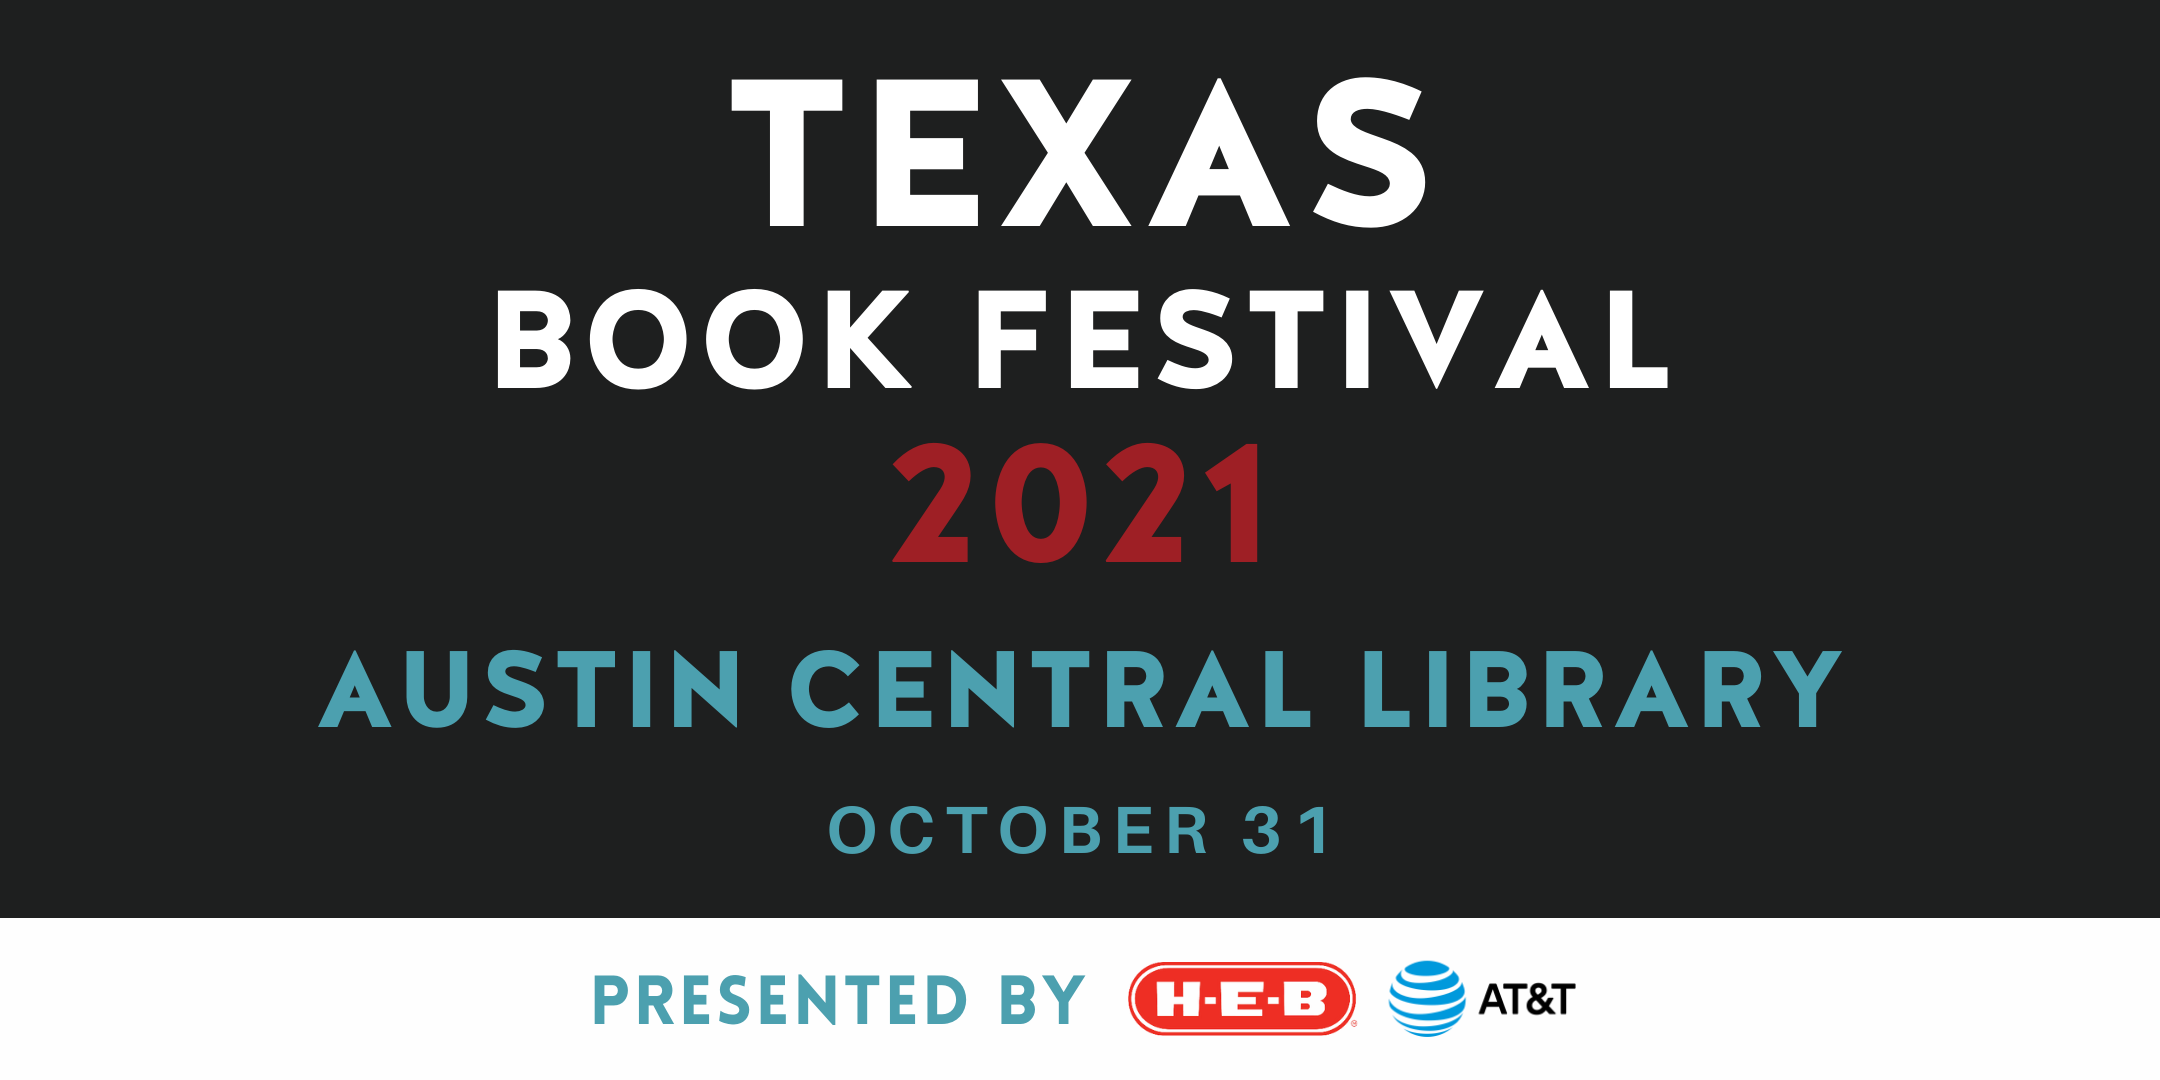 Join us at Austin Central Library!